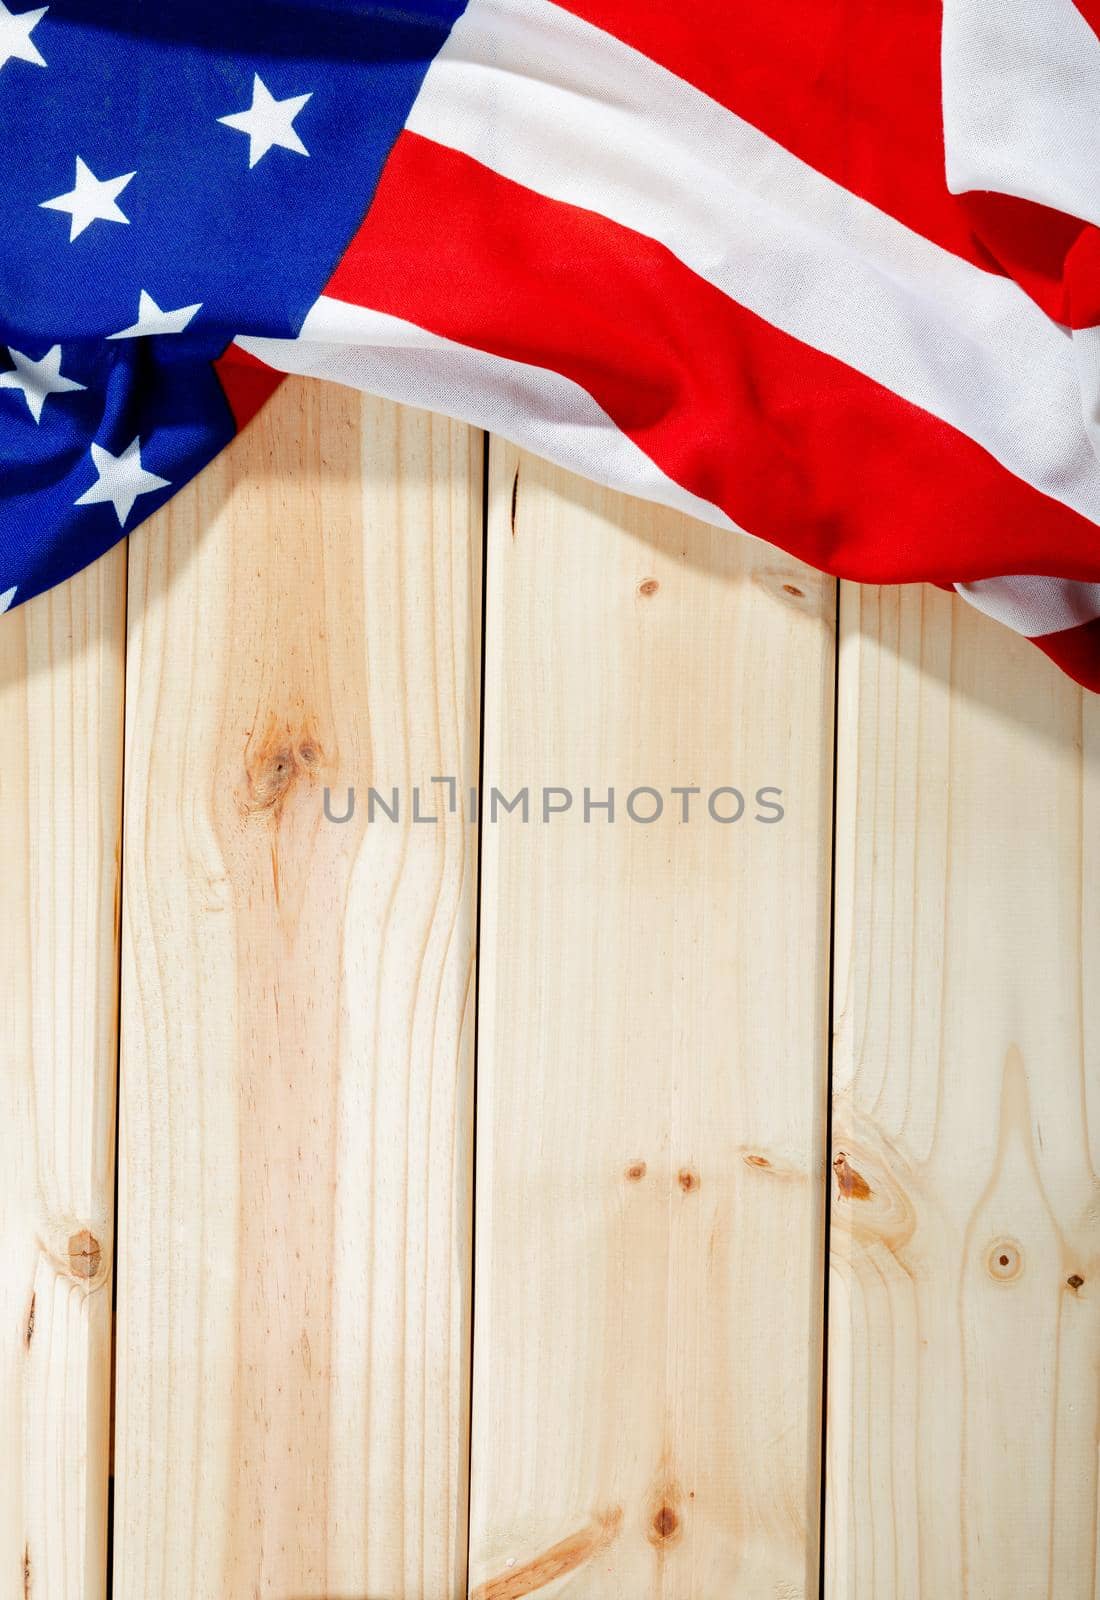 Overhead view of red and white stripes along with stars on america flag over wooden table by Wavebreakmedia